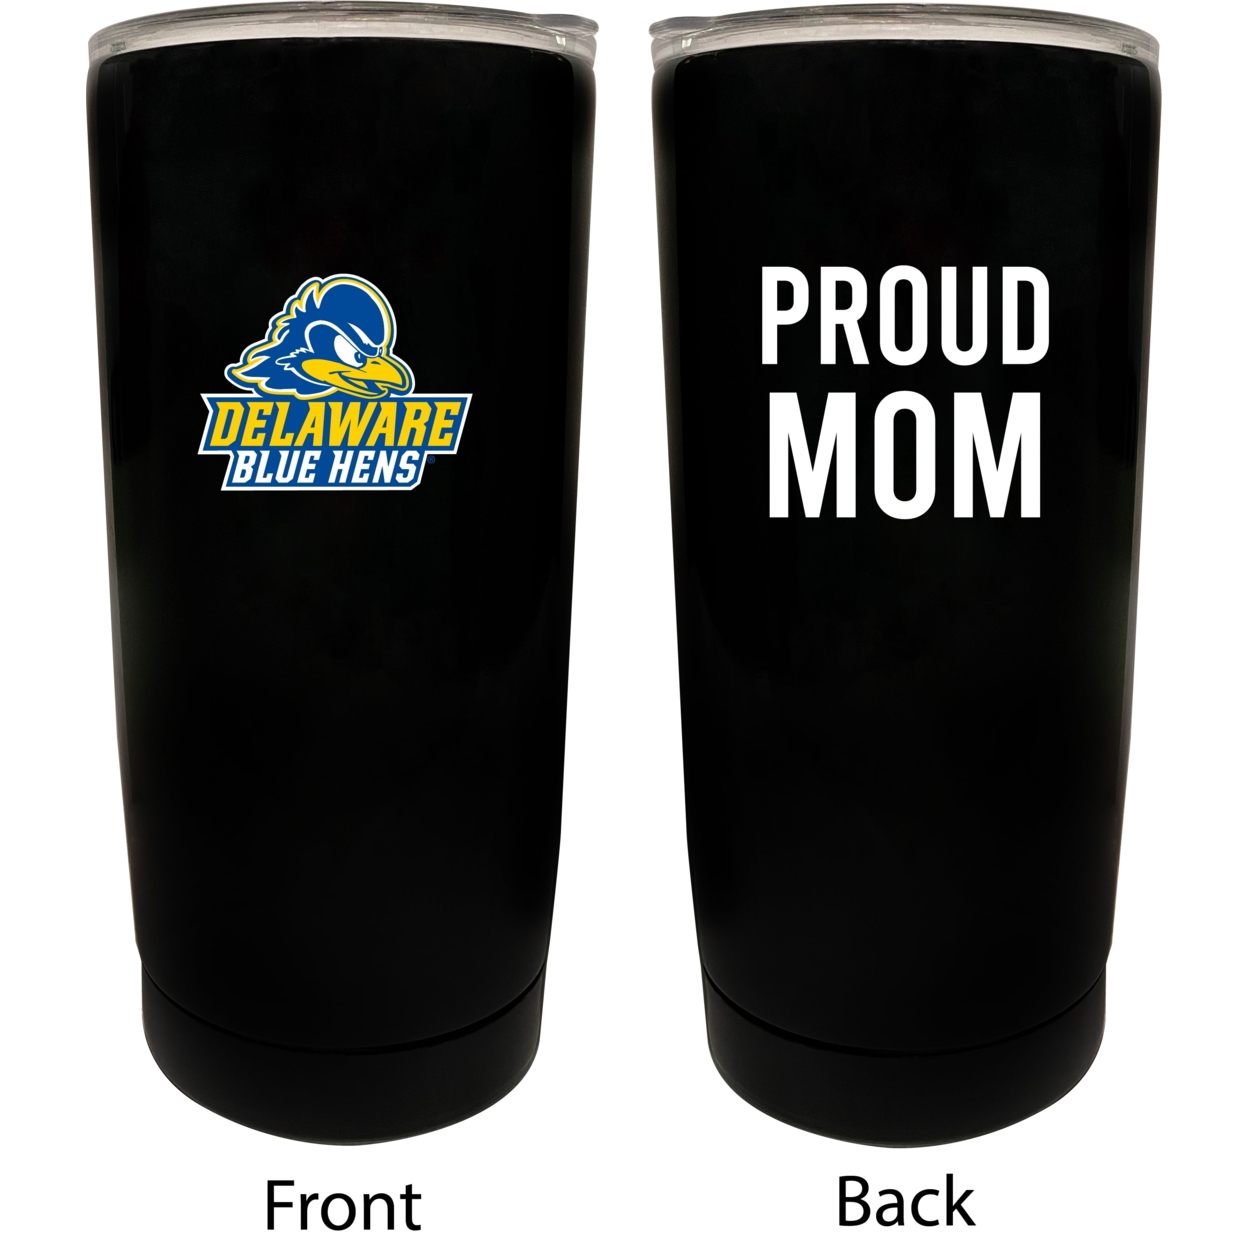 Delaware Blue Hens Proud Mom 16 Oz Insulated Stainless Steel Tumblers